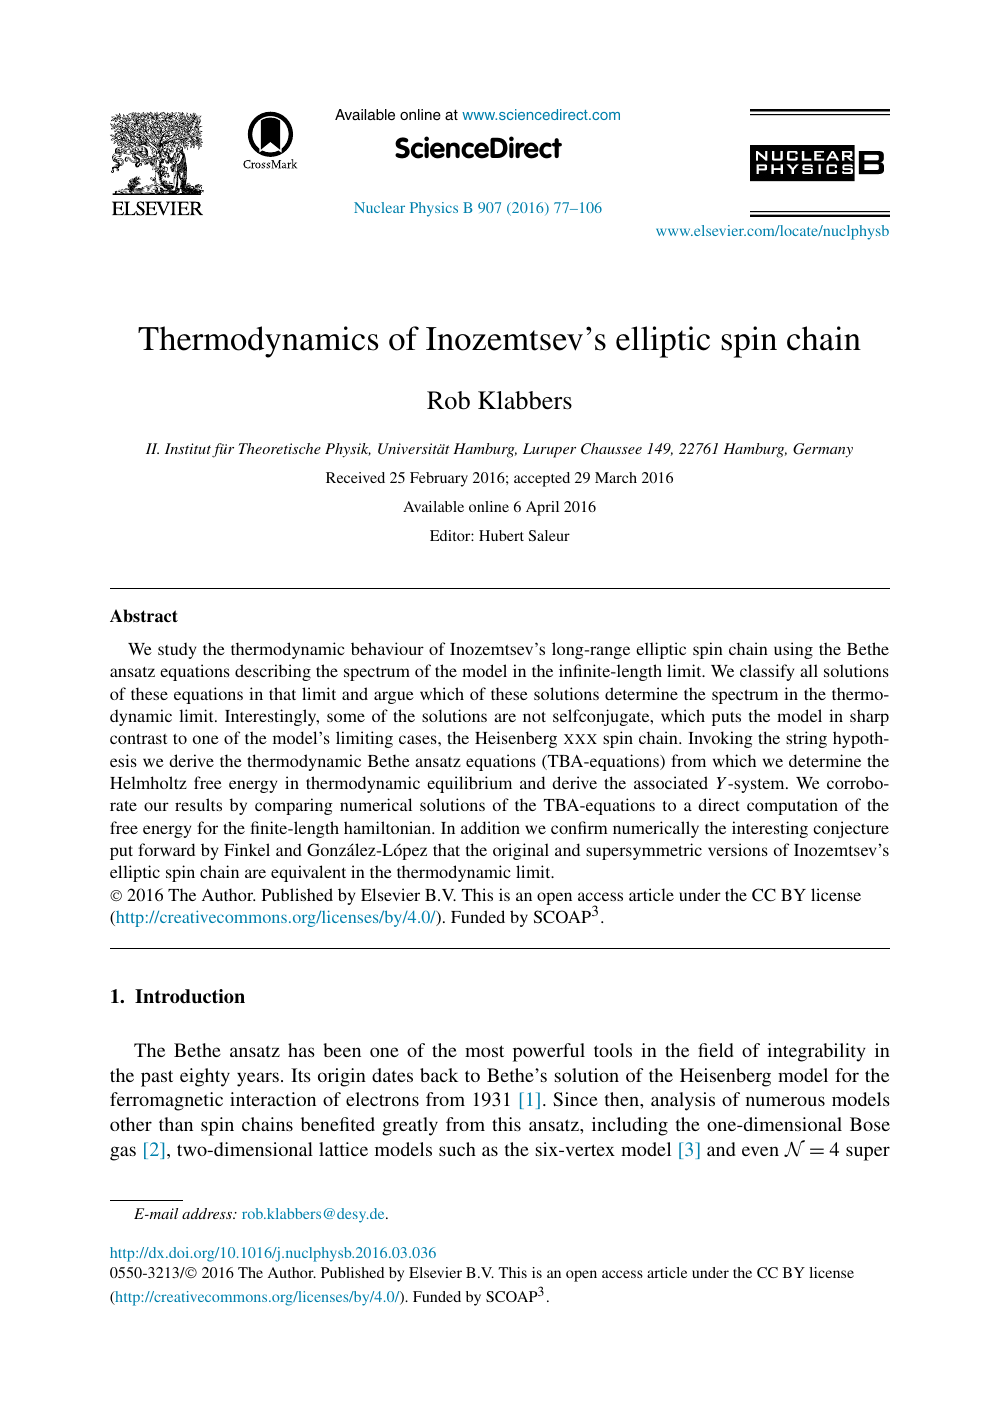 Thermodynamics Of Inozemtsev S Elliptic Spin Chain Topic Of Research Paper In Physical Sciences Download Scholarly Article Pdf And Read For Free On Cyberleninka Open Science Hub